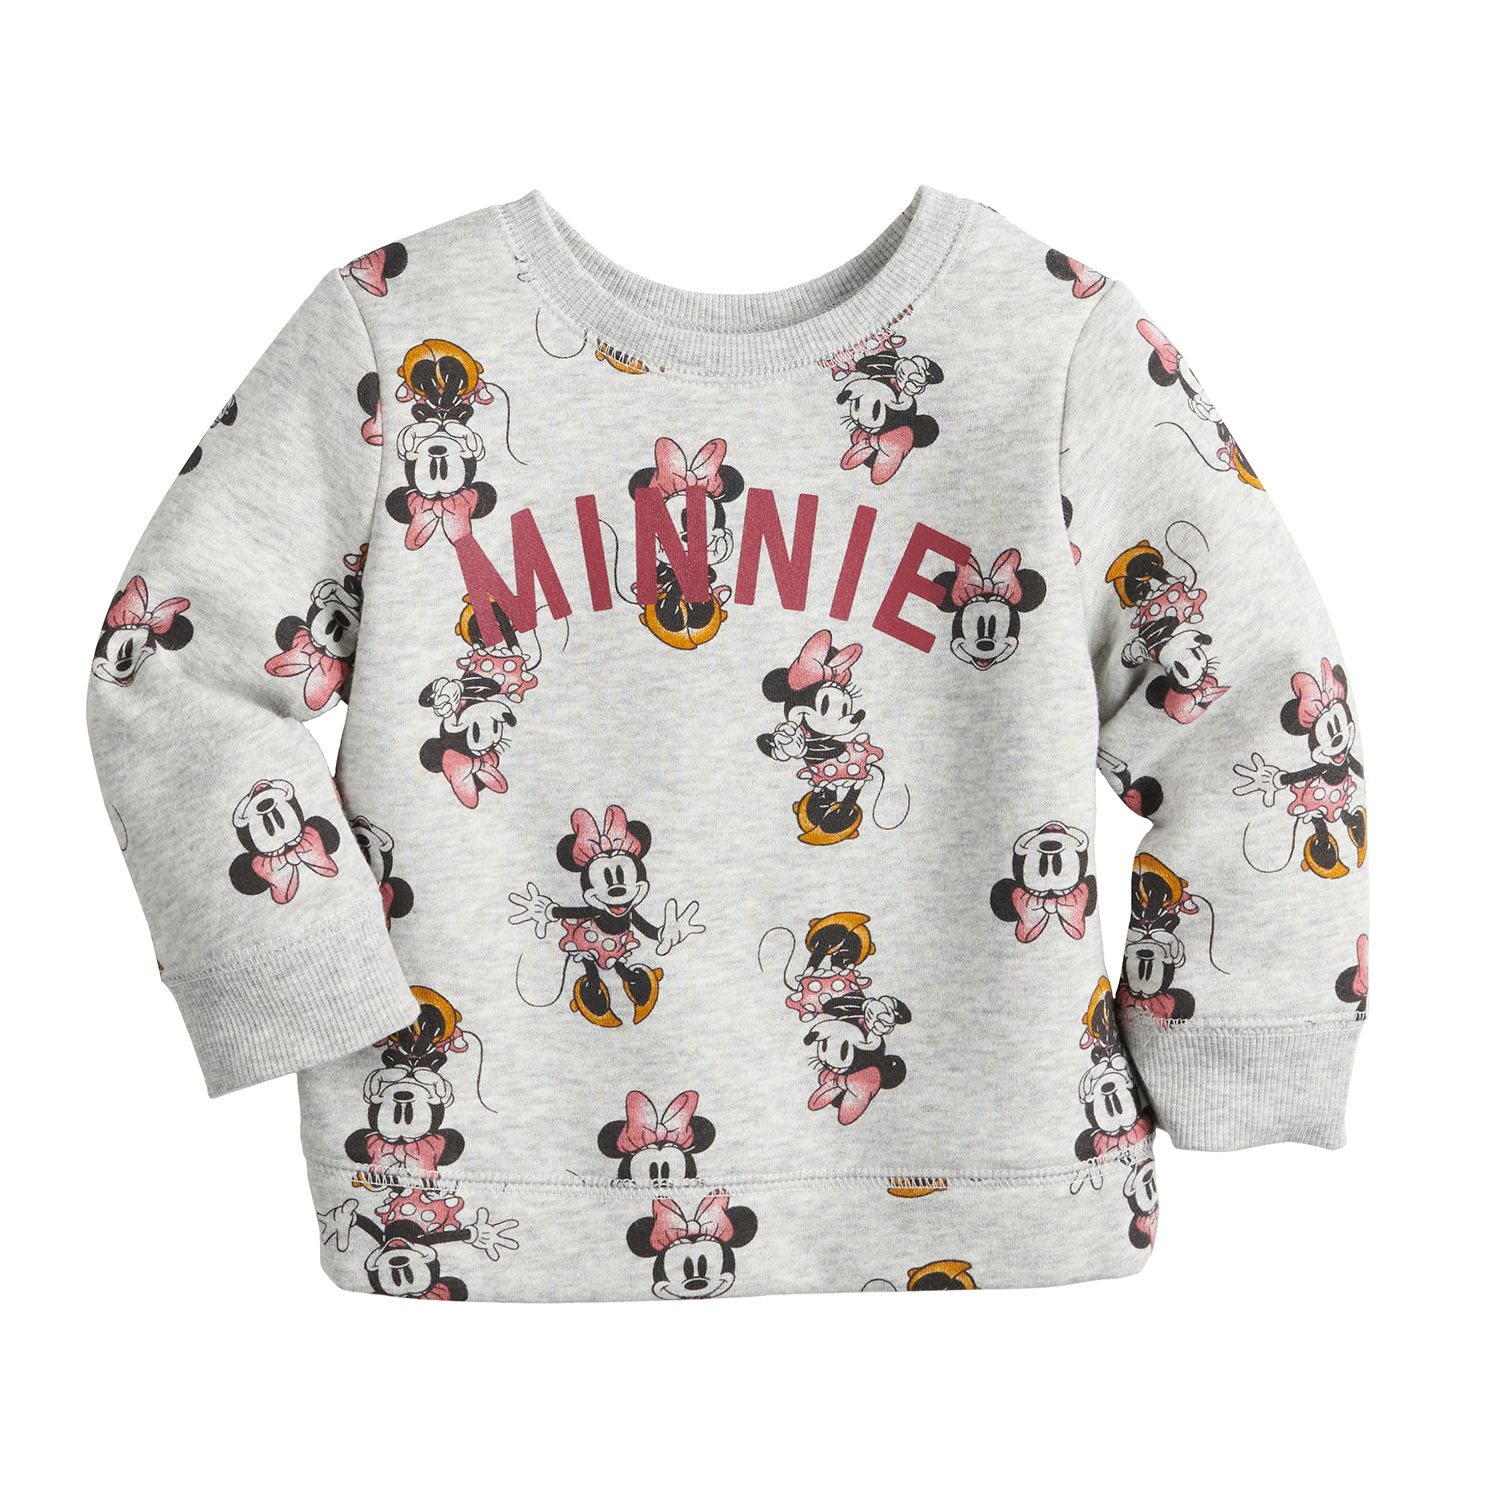 Image for Disney/Jumping Beans Disney's Baby Girl Fleece Crew by Jumping Beans® at Kohl's.